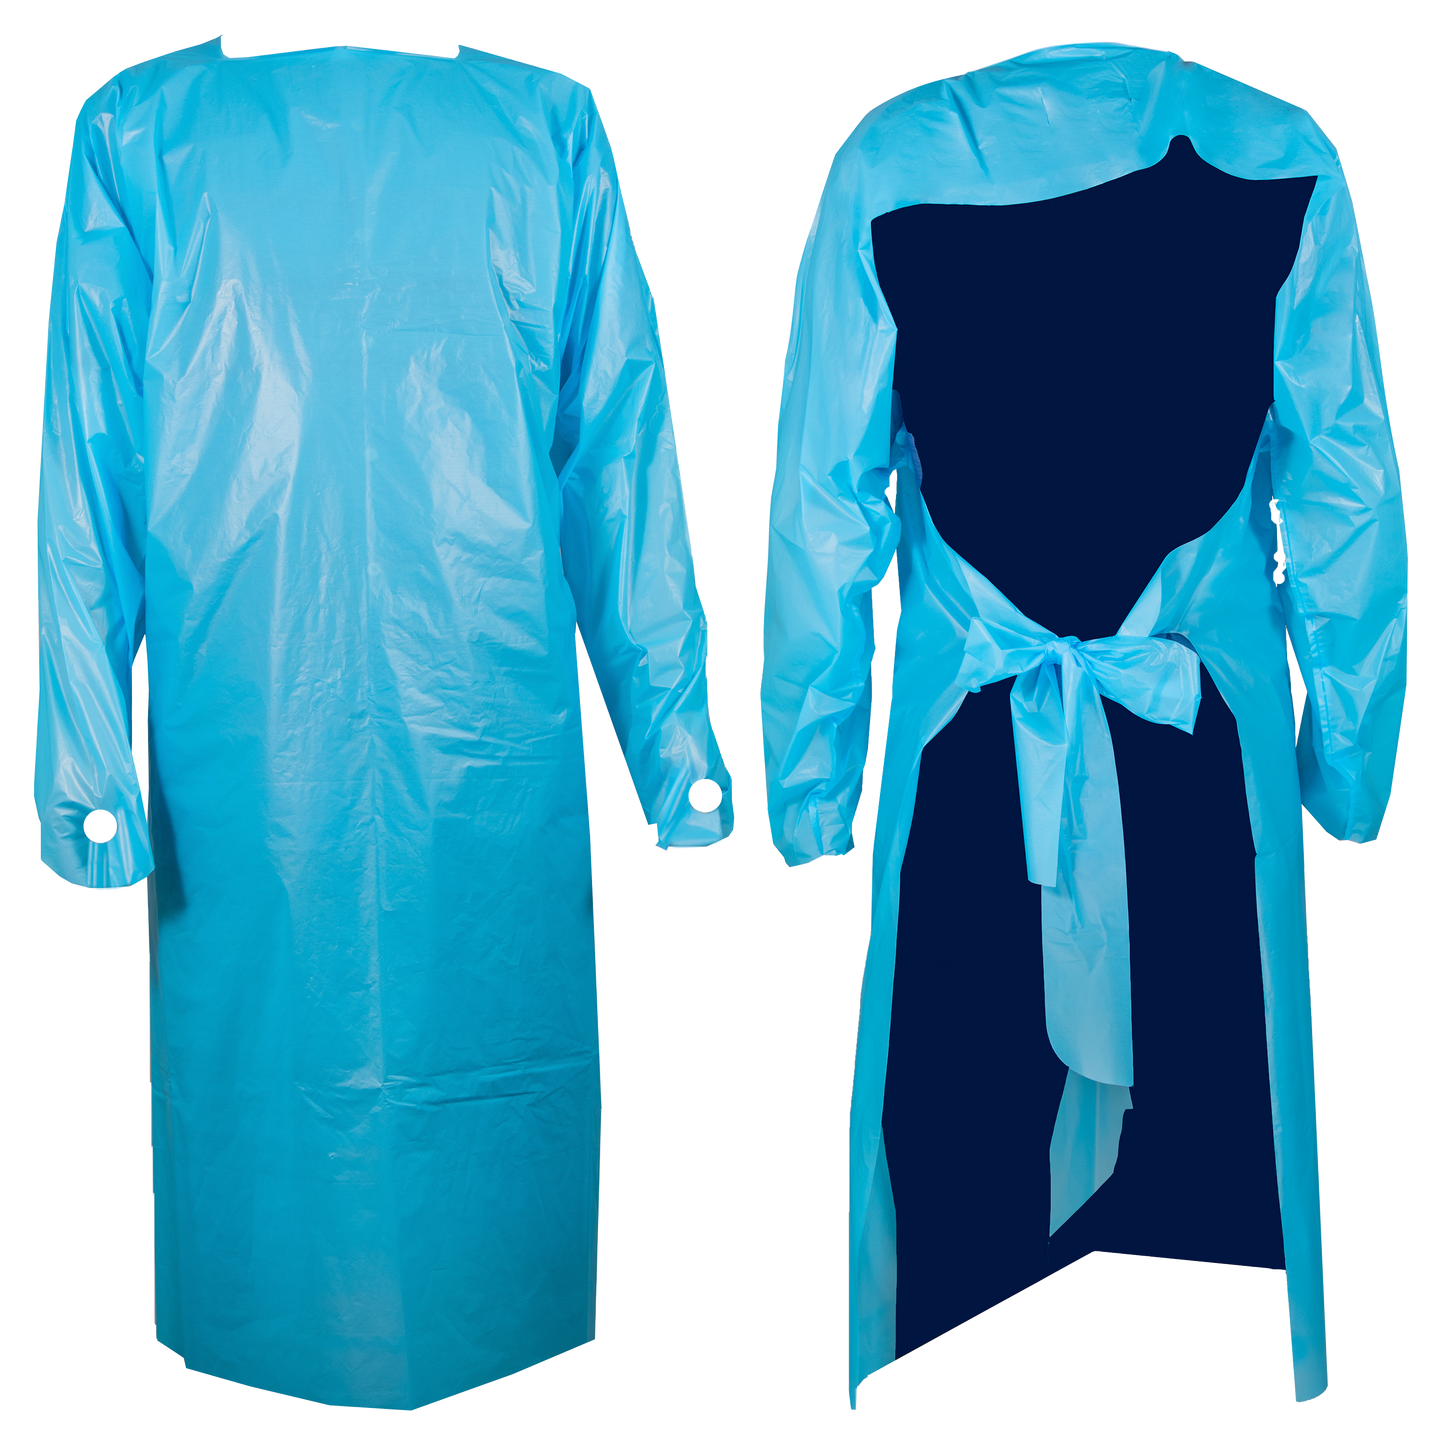 Isolation Gown product